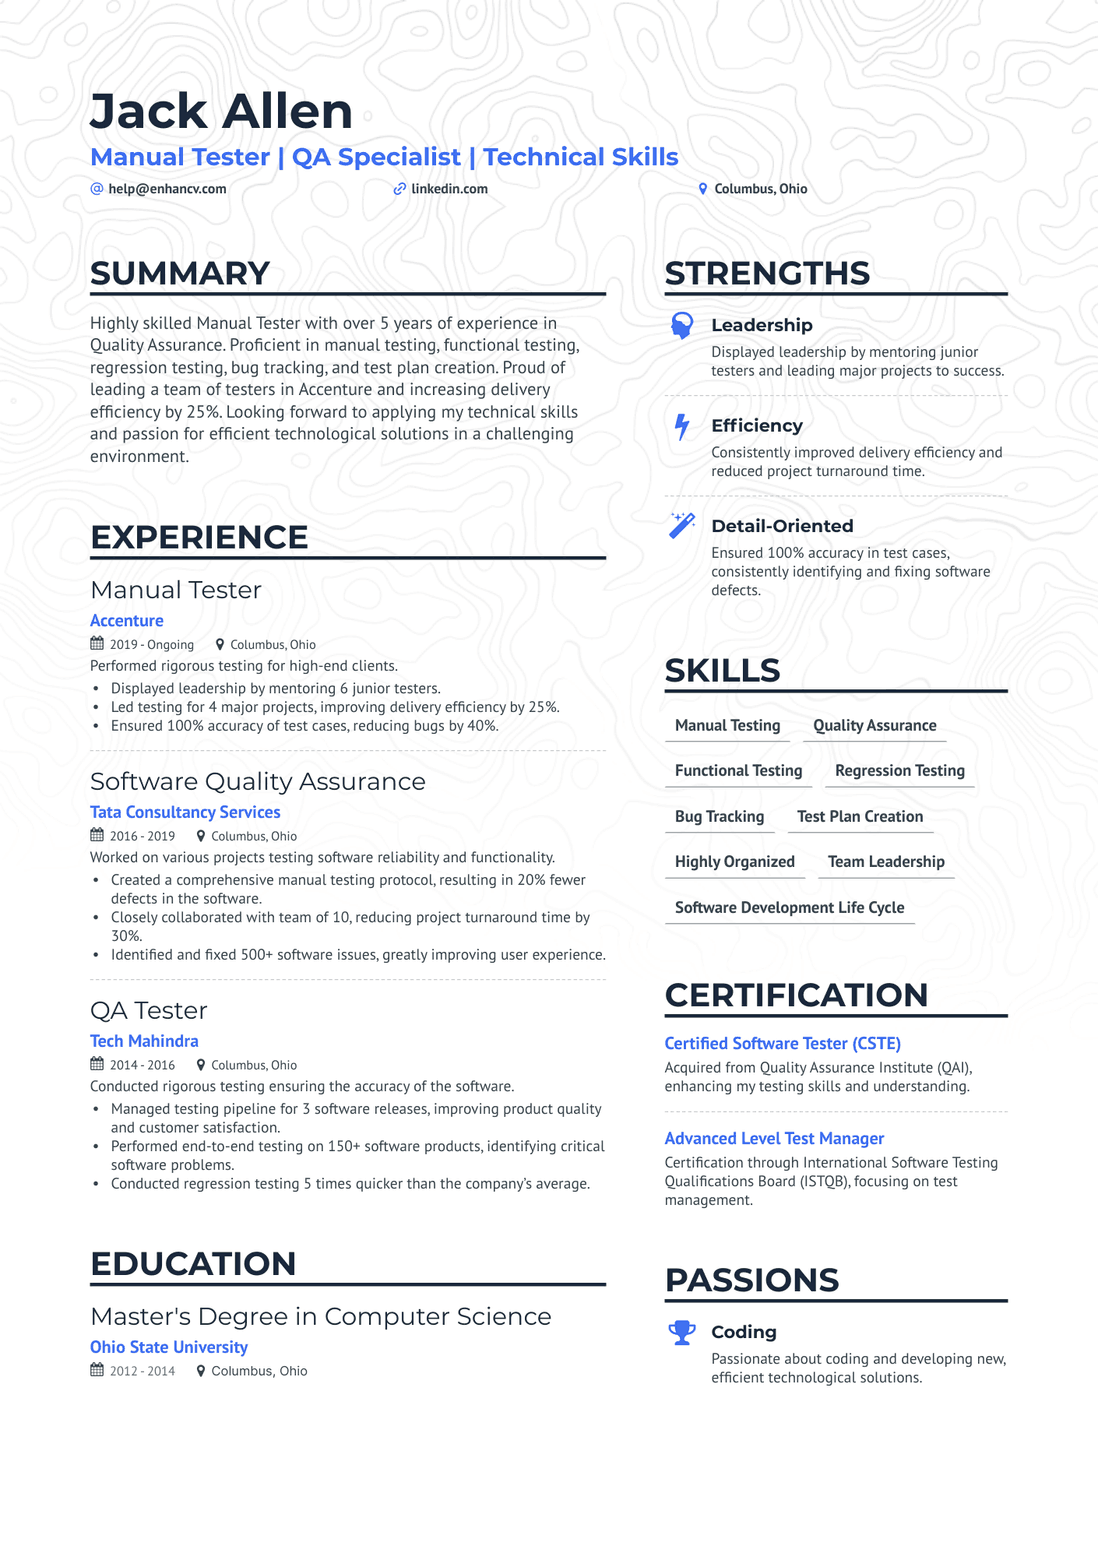 resume format for 3 years experience in manual testing